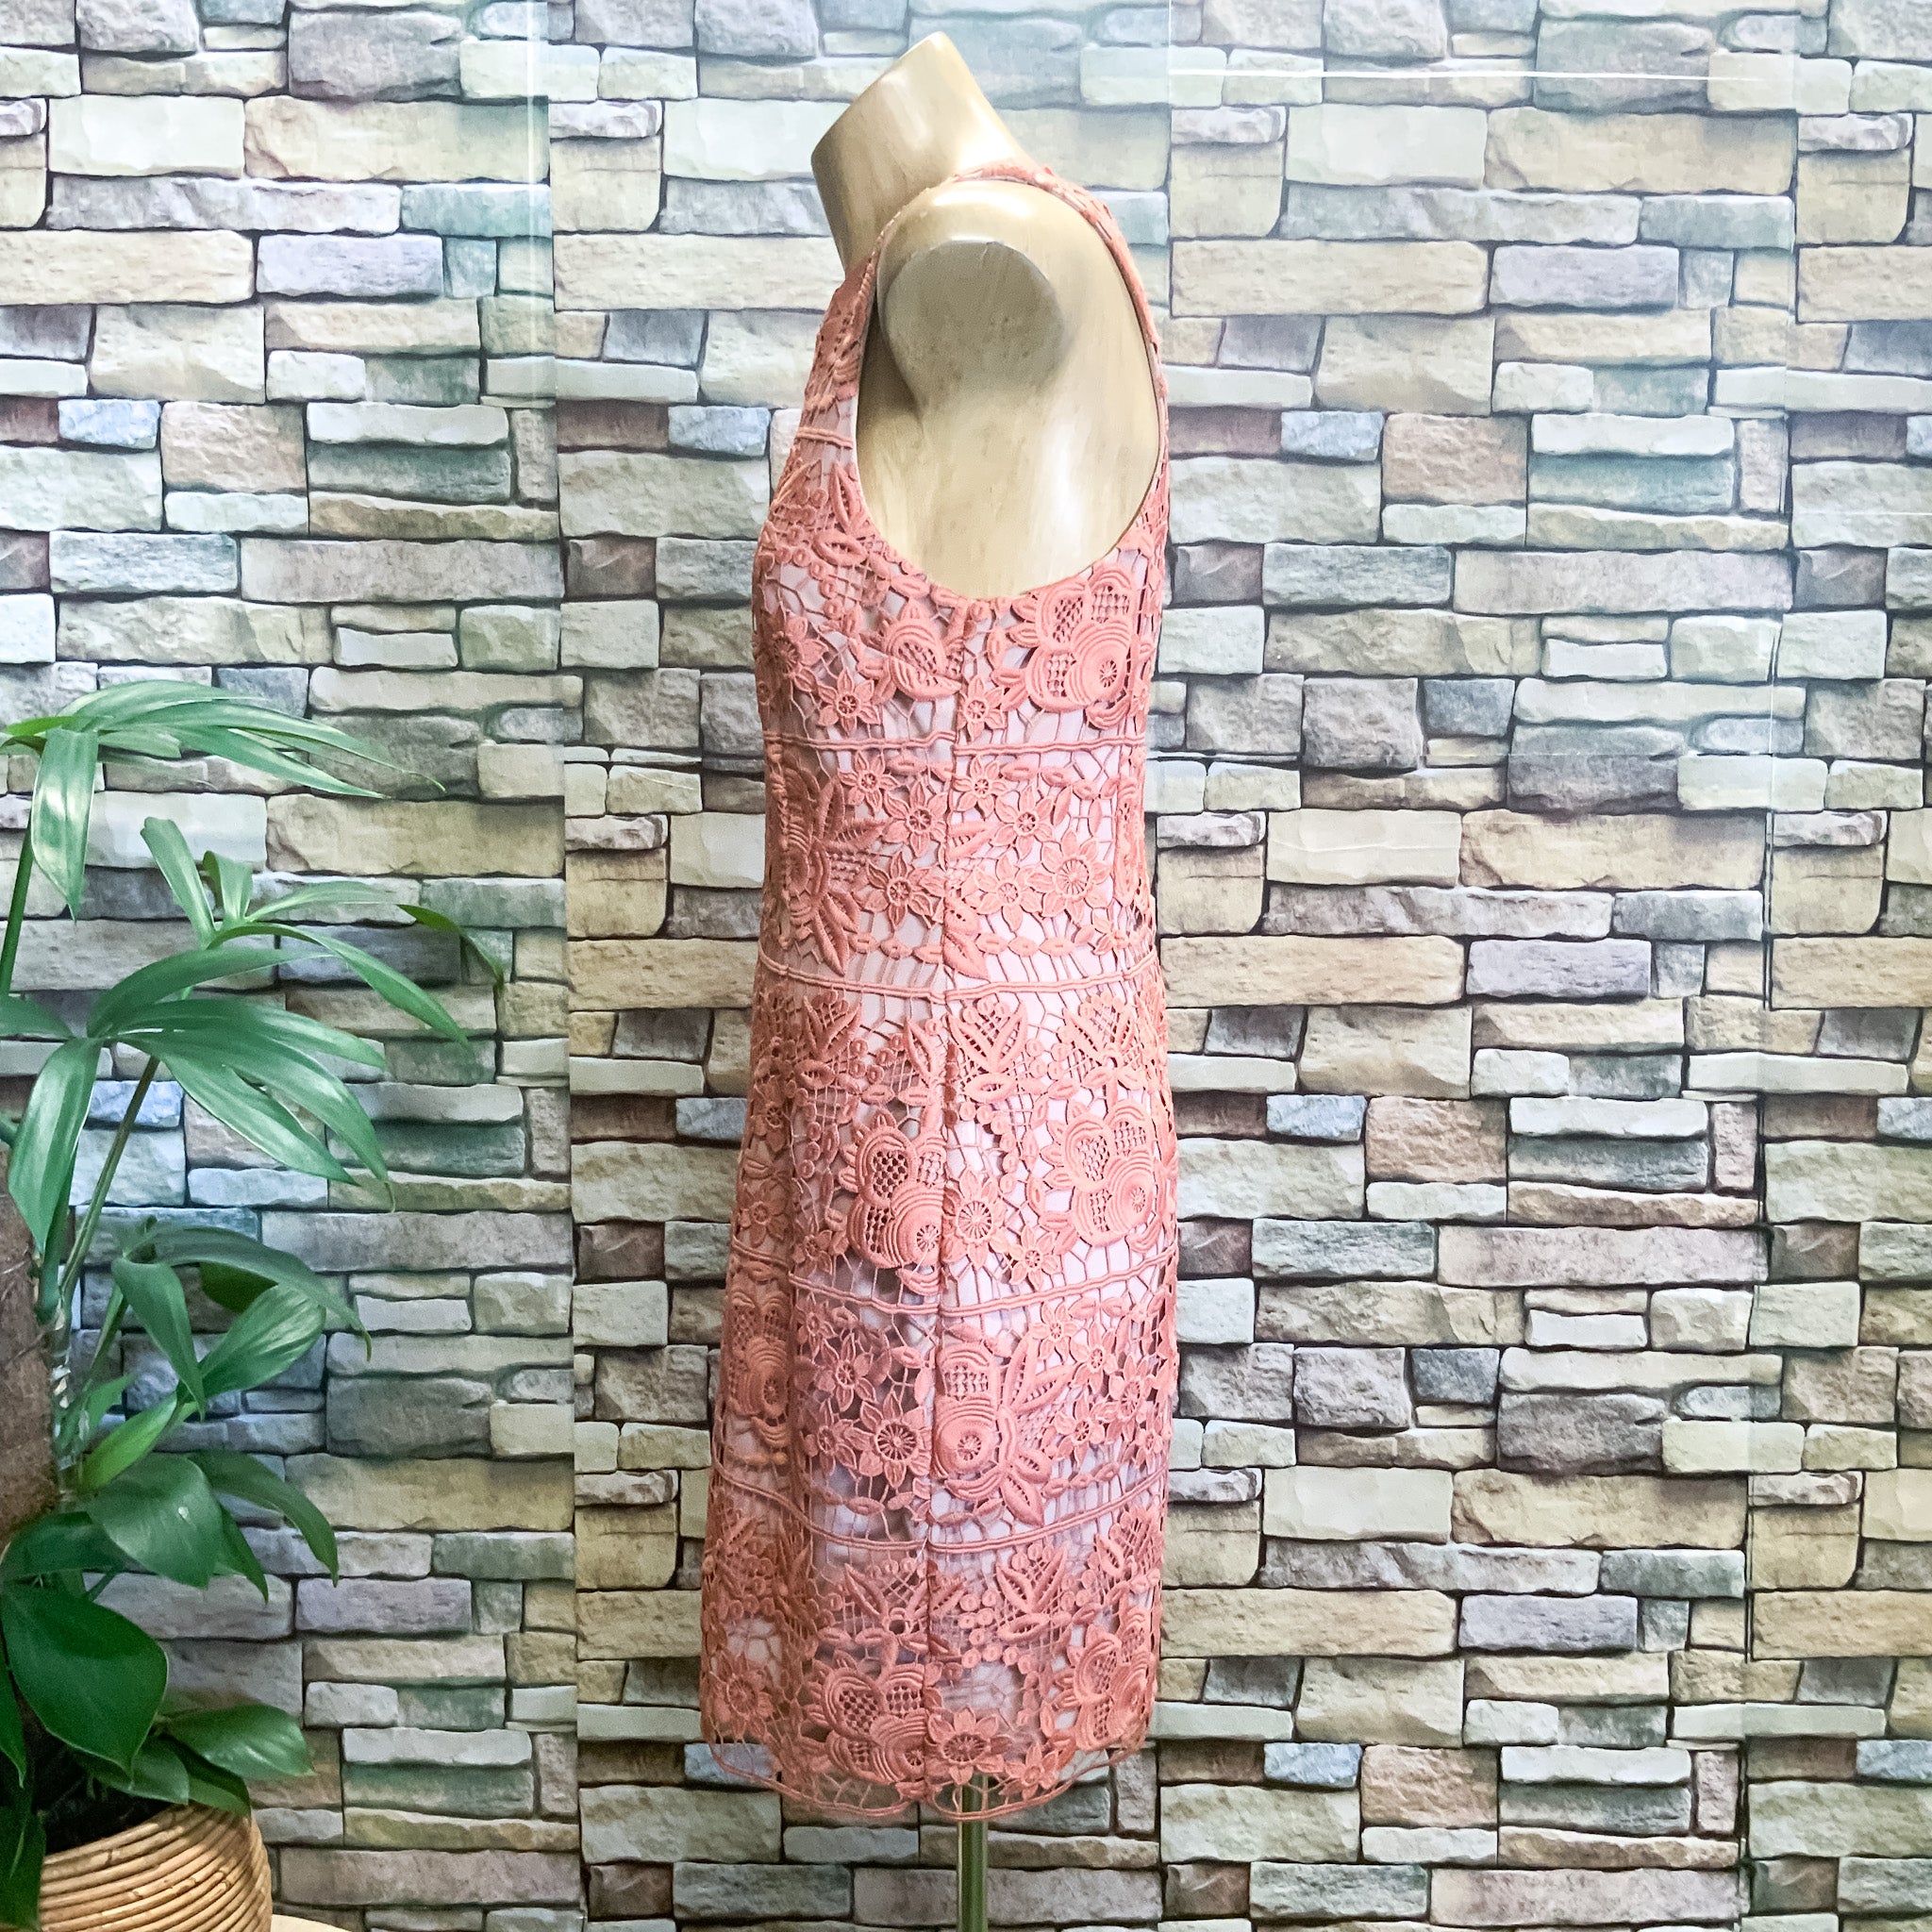 MINISTRY OF STYLE Peach Lace Form Fitting Cocktail Dress - Size 8